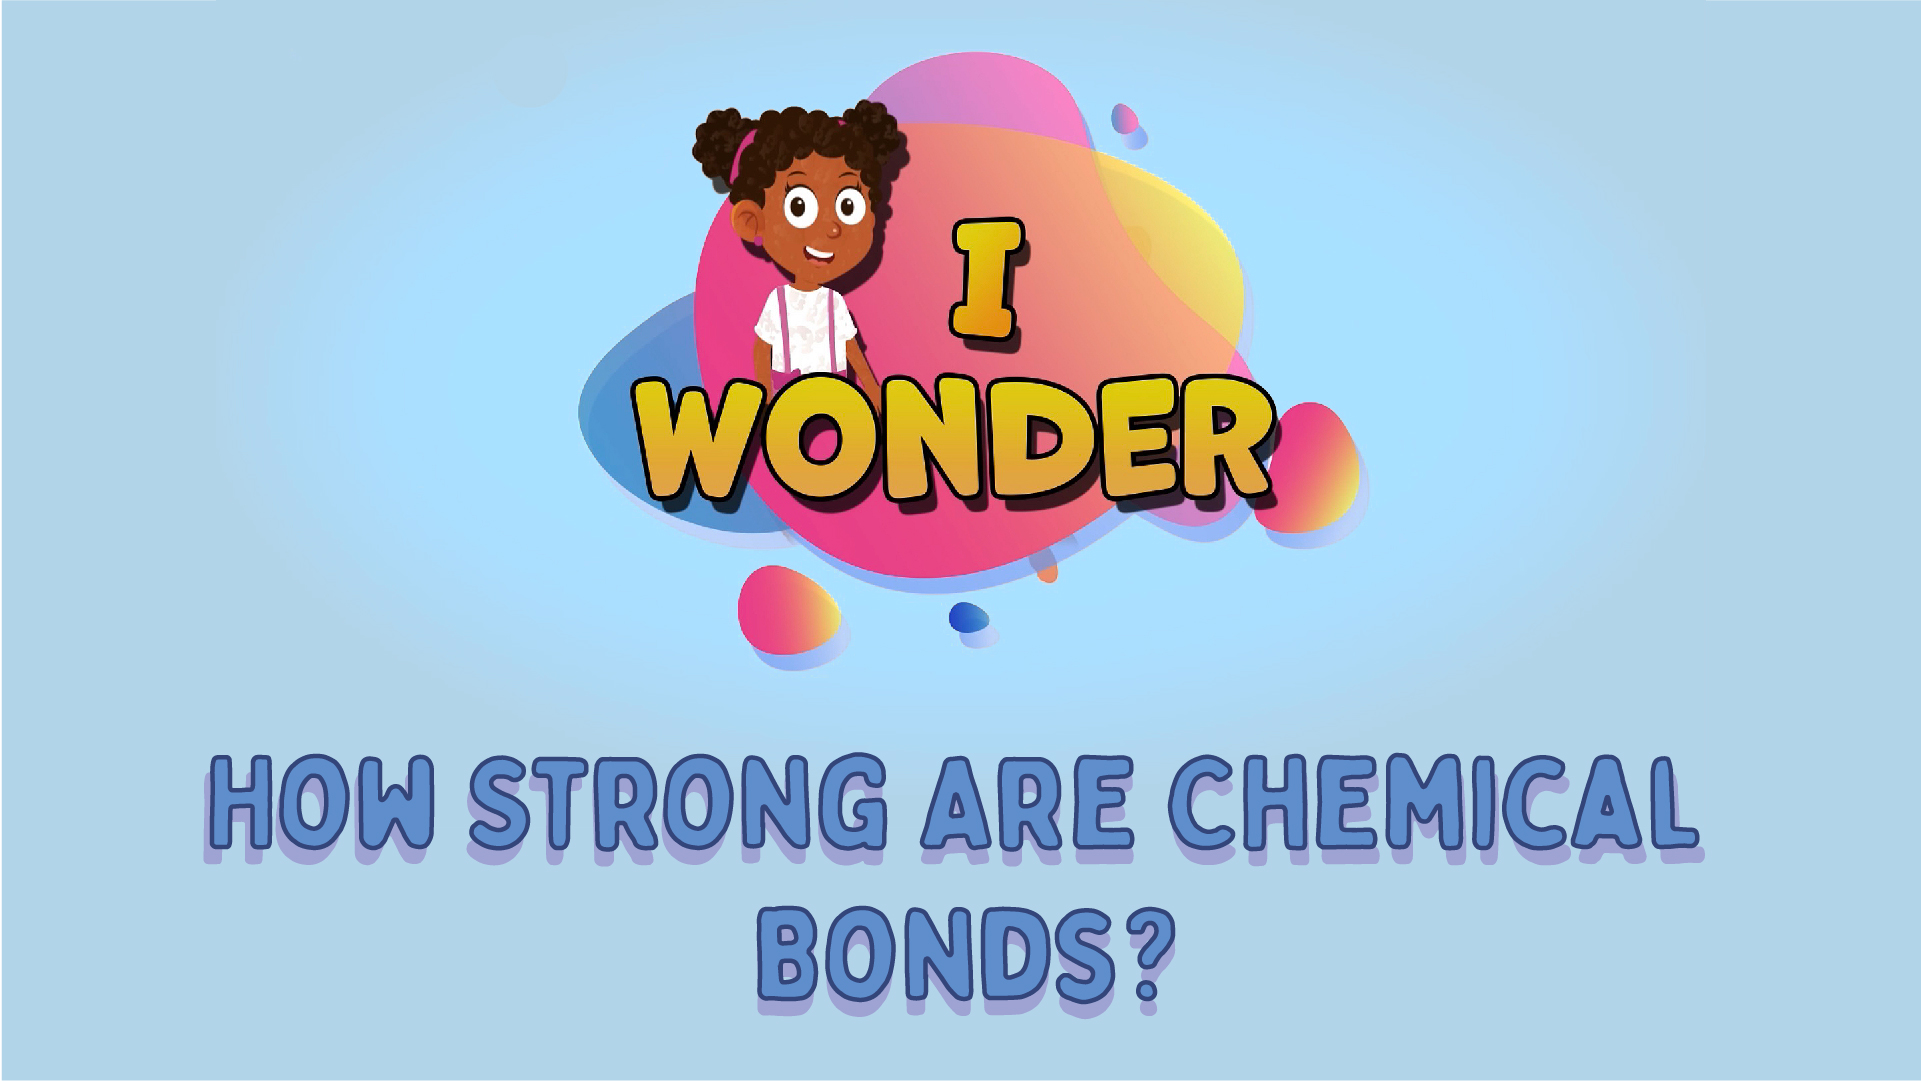 How Strong Are Chemical Bonds?